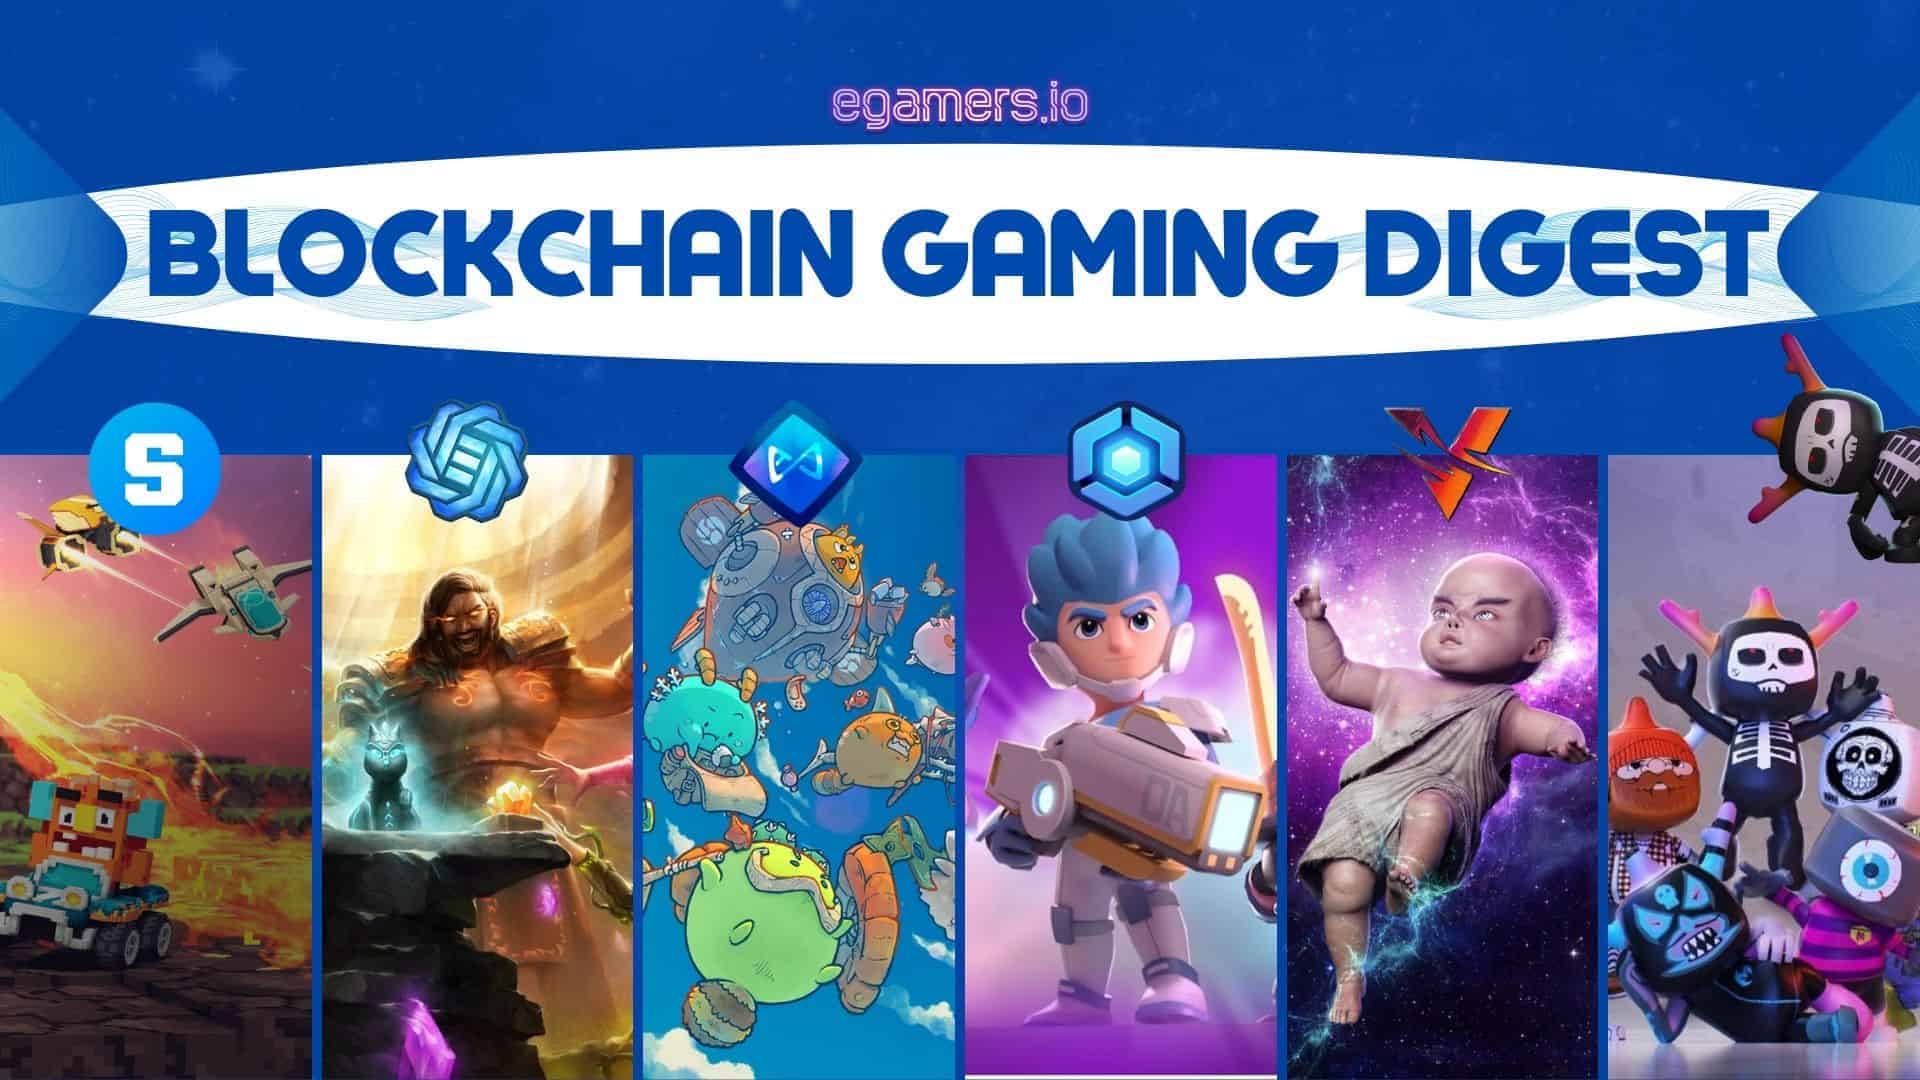 BLOCKCHAIN GAMING DIGEST new The Sandbox, together with Chain Games, formed a partnership in order to bring the Chain Game's ecosystem into the Sandbox Metaverse.